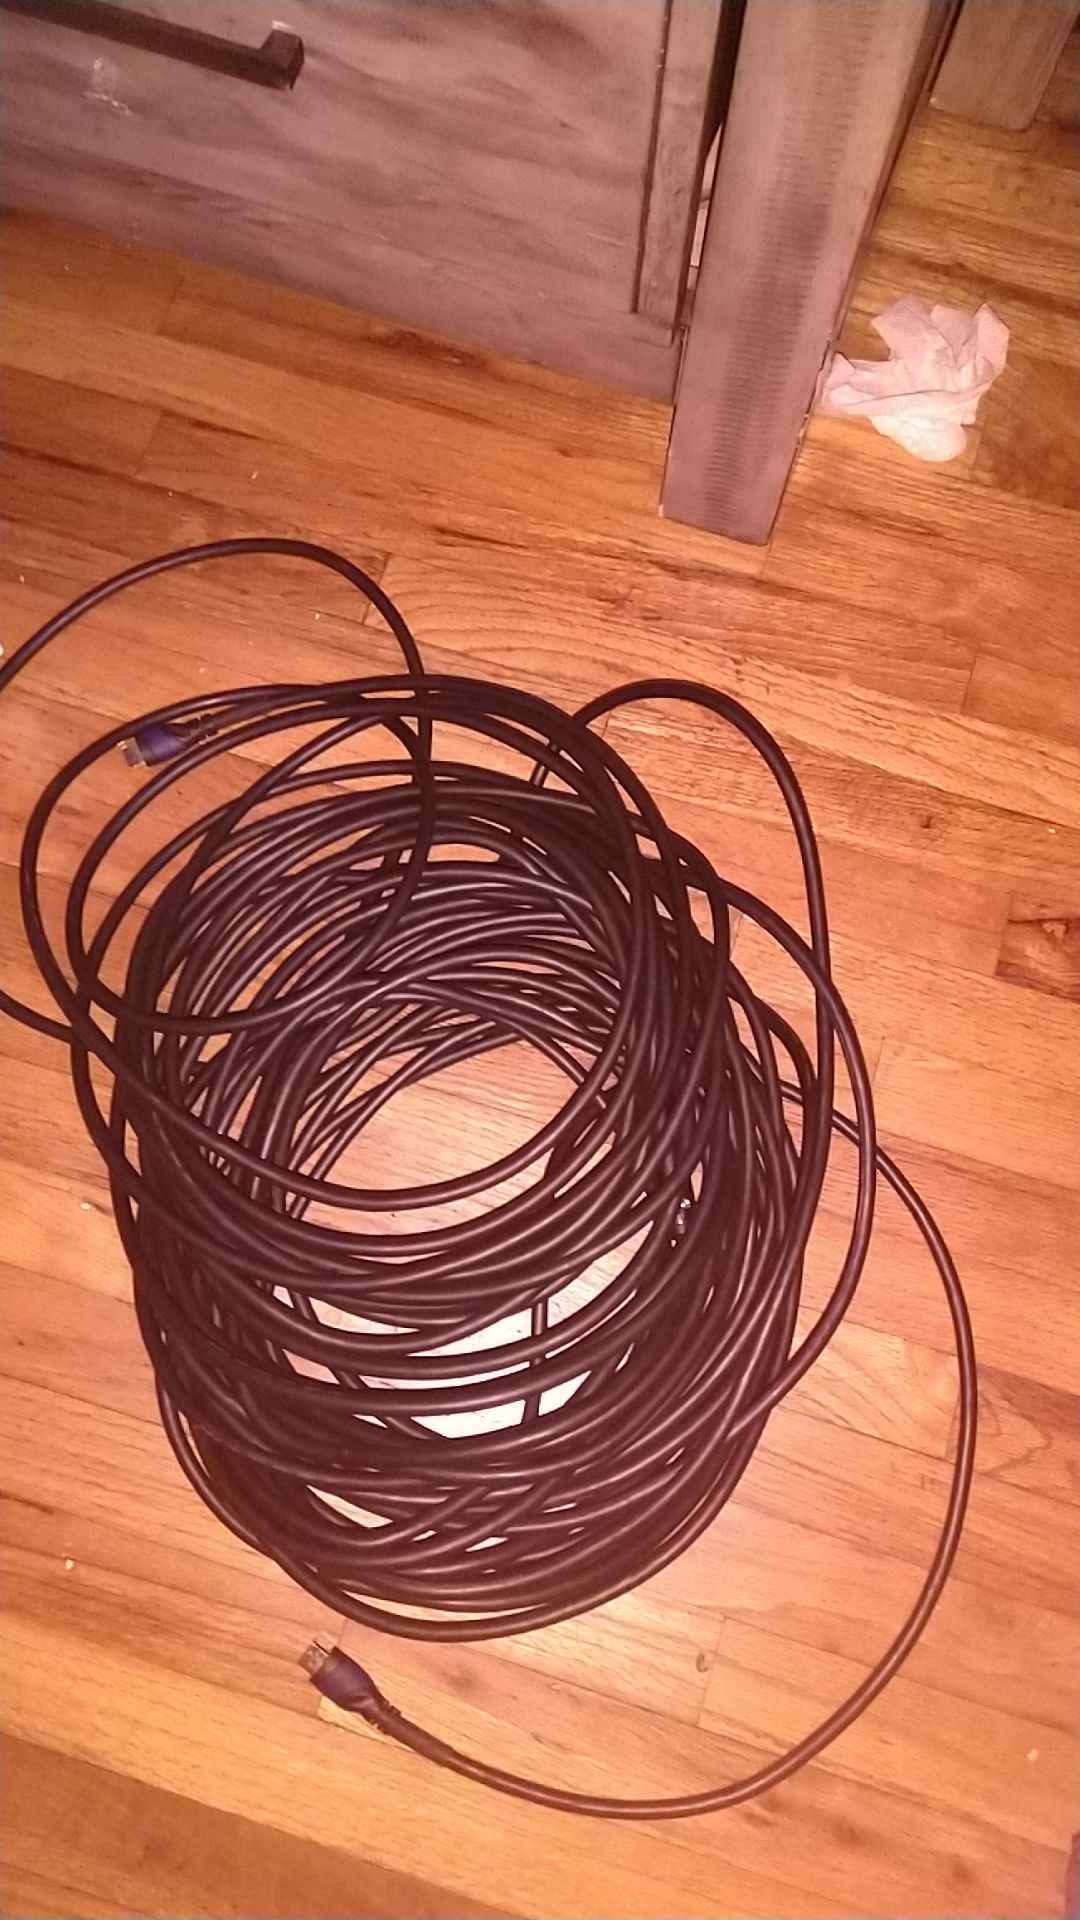 Long HDMI cable